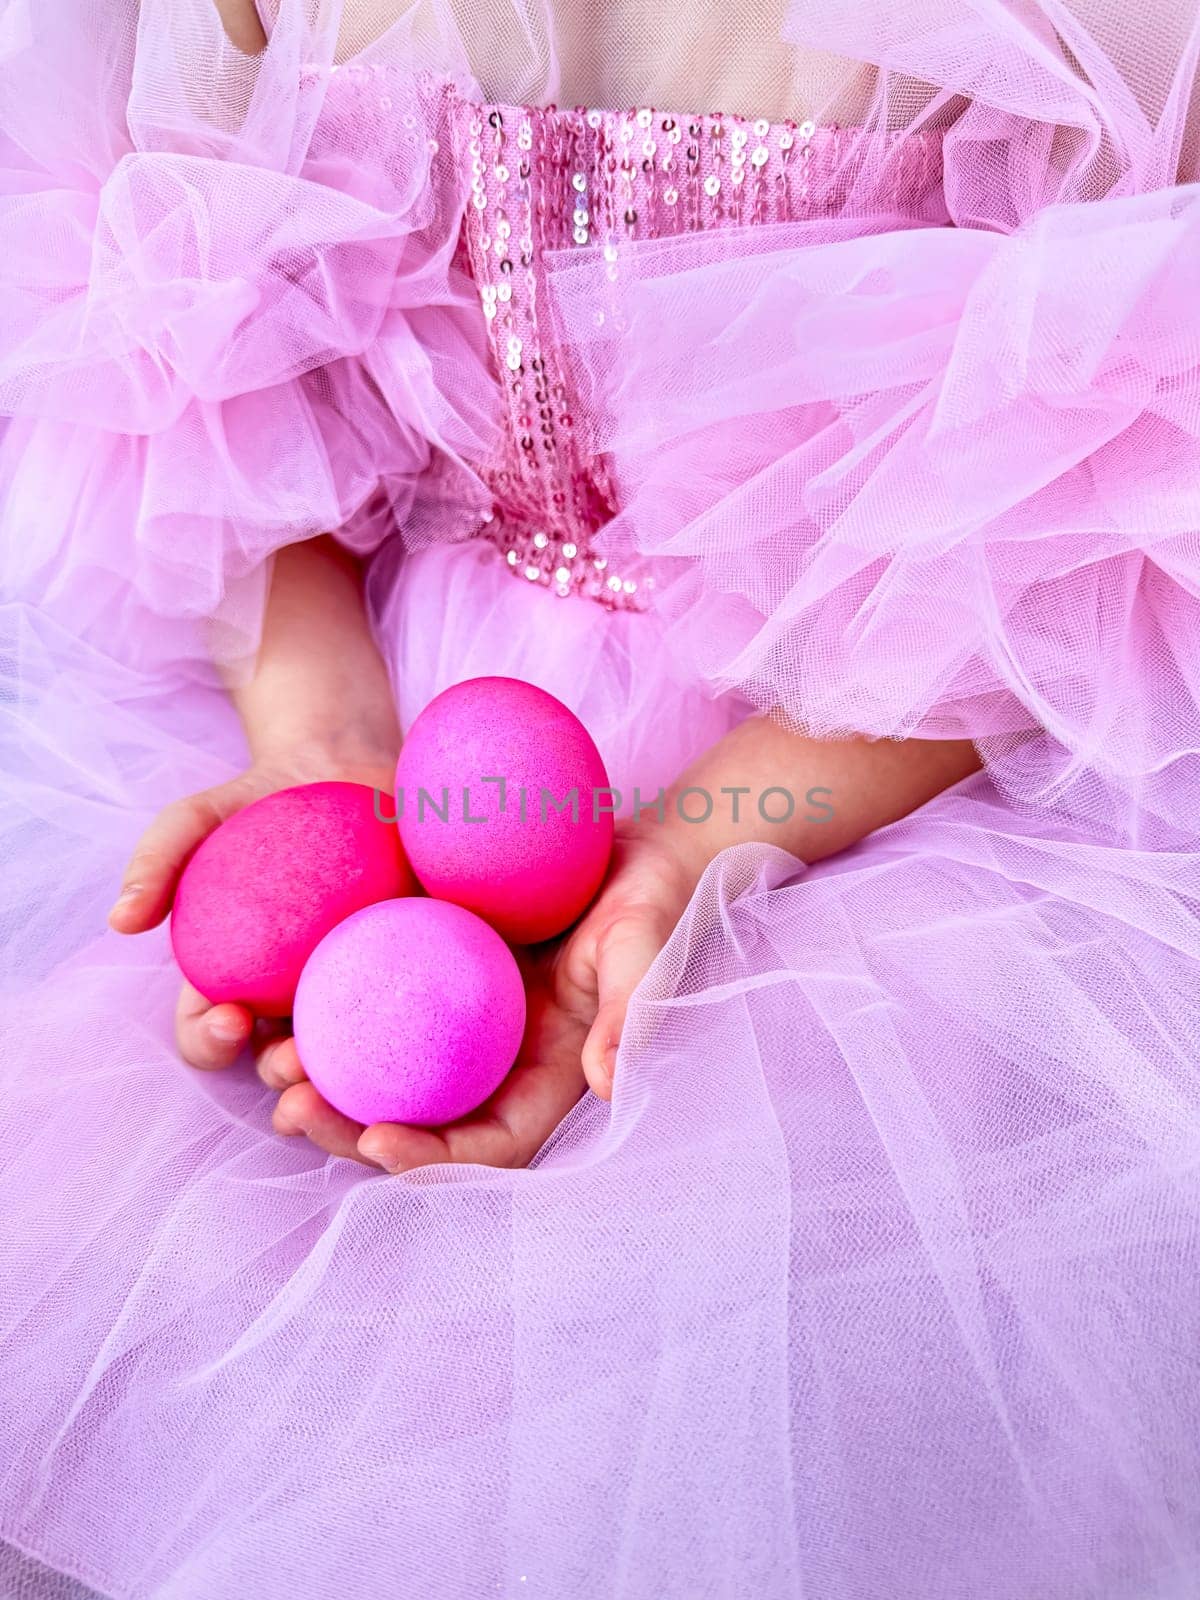 Child in pink tulle dress holding bright pink eggs, Easter celebration concept with a playful and festive feel. For Easter related marketing materials, event invitations, childrens party advertisements. by Lunnica